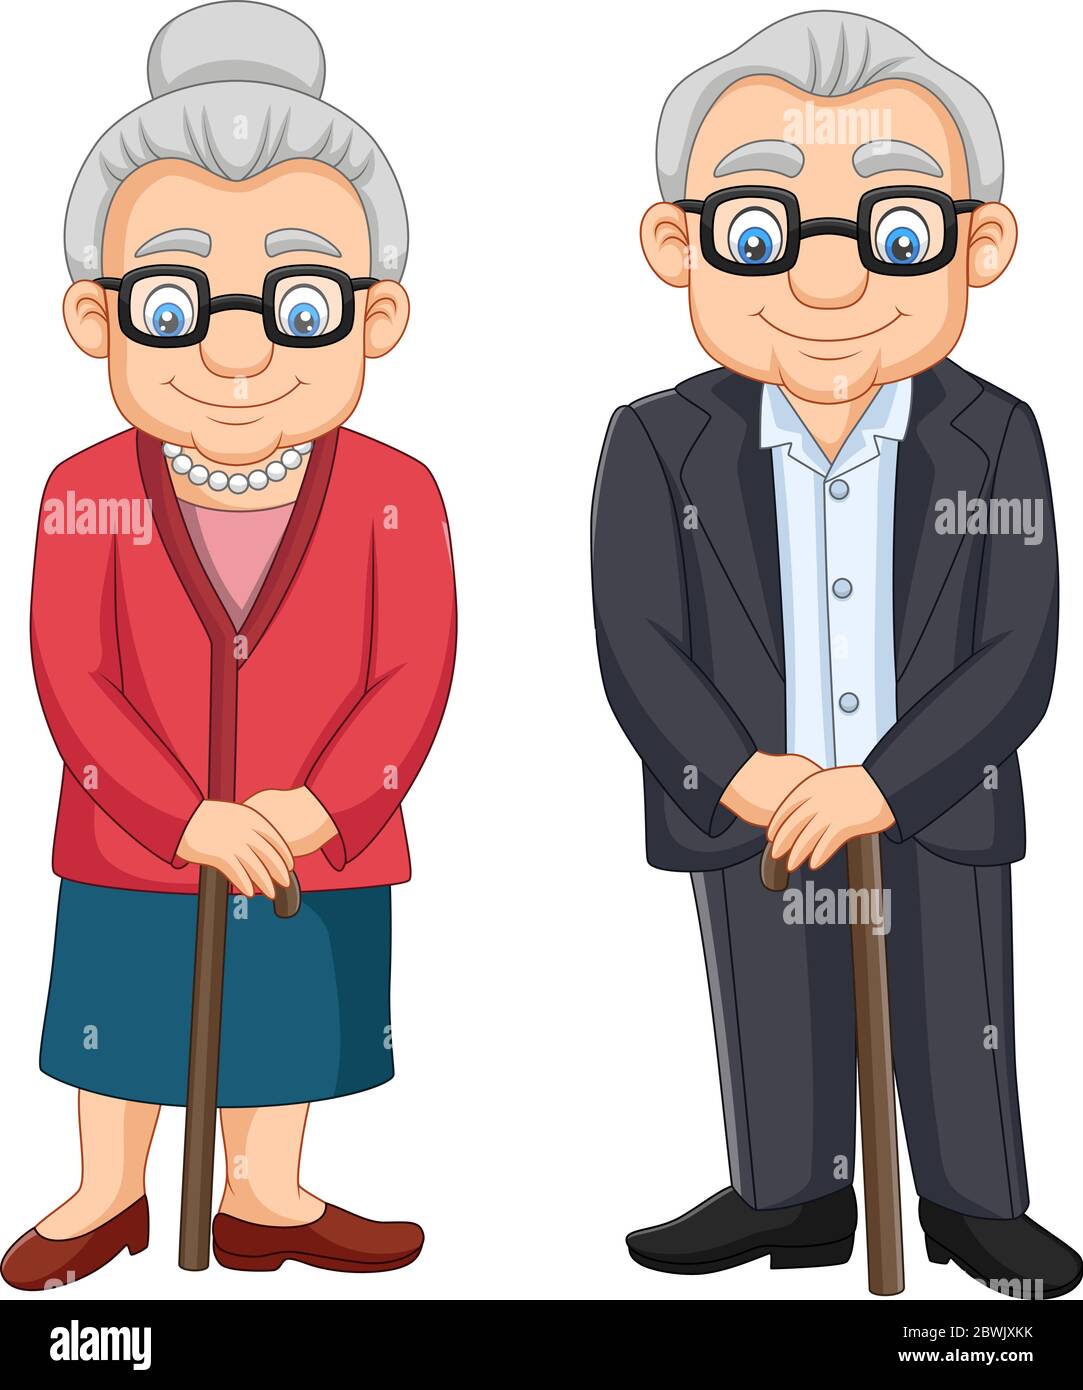 old couple cartoon images